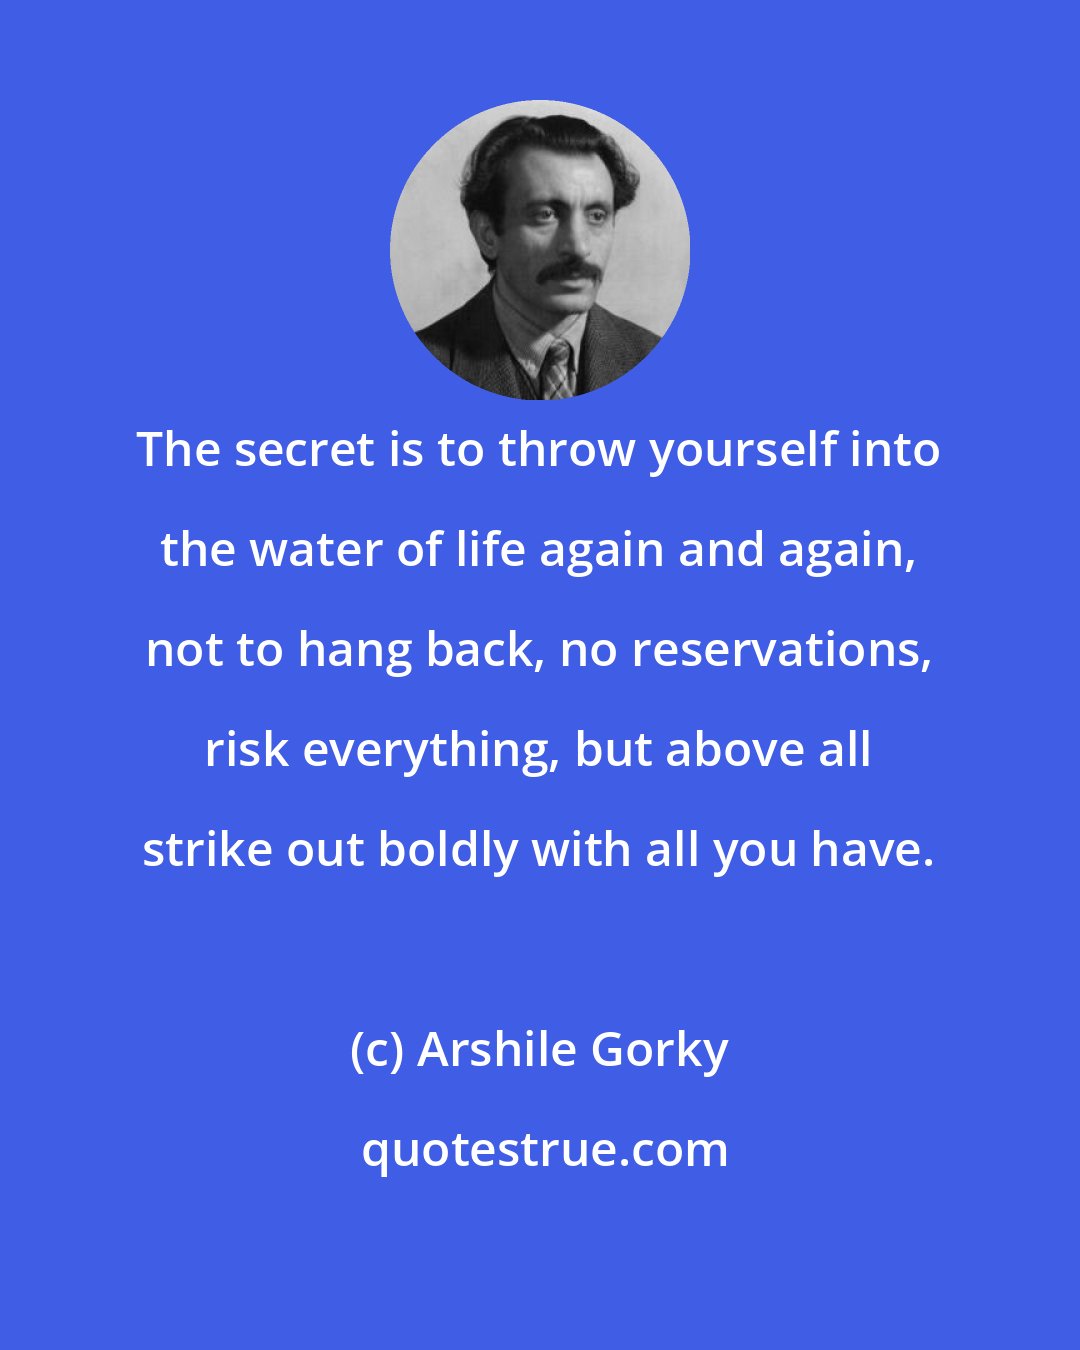 Arshile Gorky: The secret is to throw yourself into the water of life again and again, not to hang back, no reservations, risk everything, but above all strike out boldly with all you have.